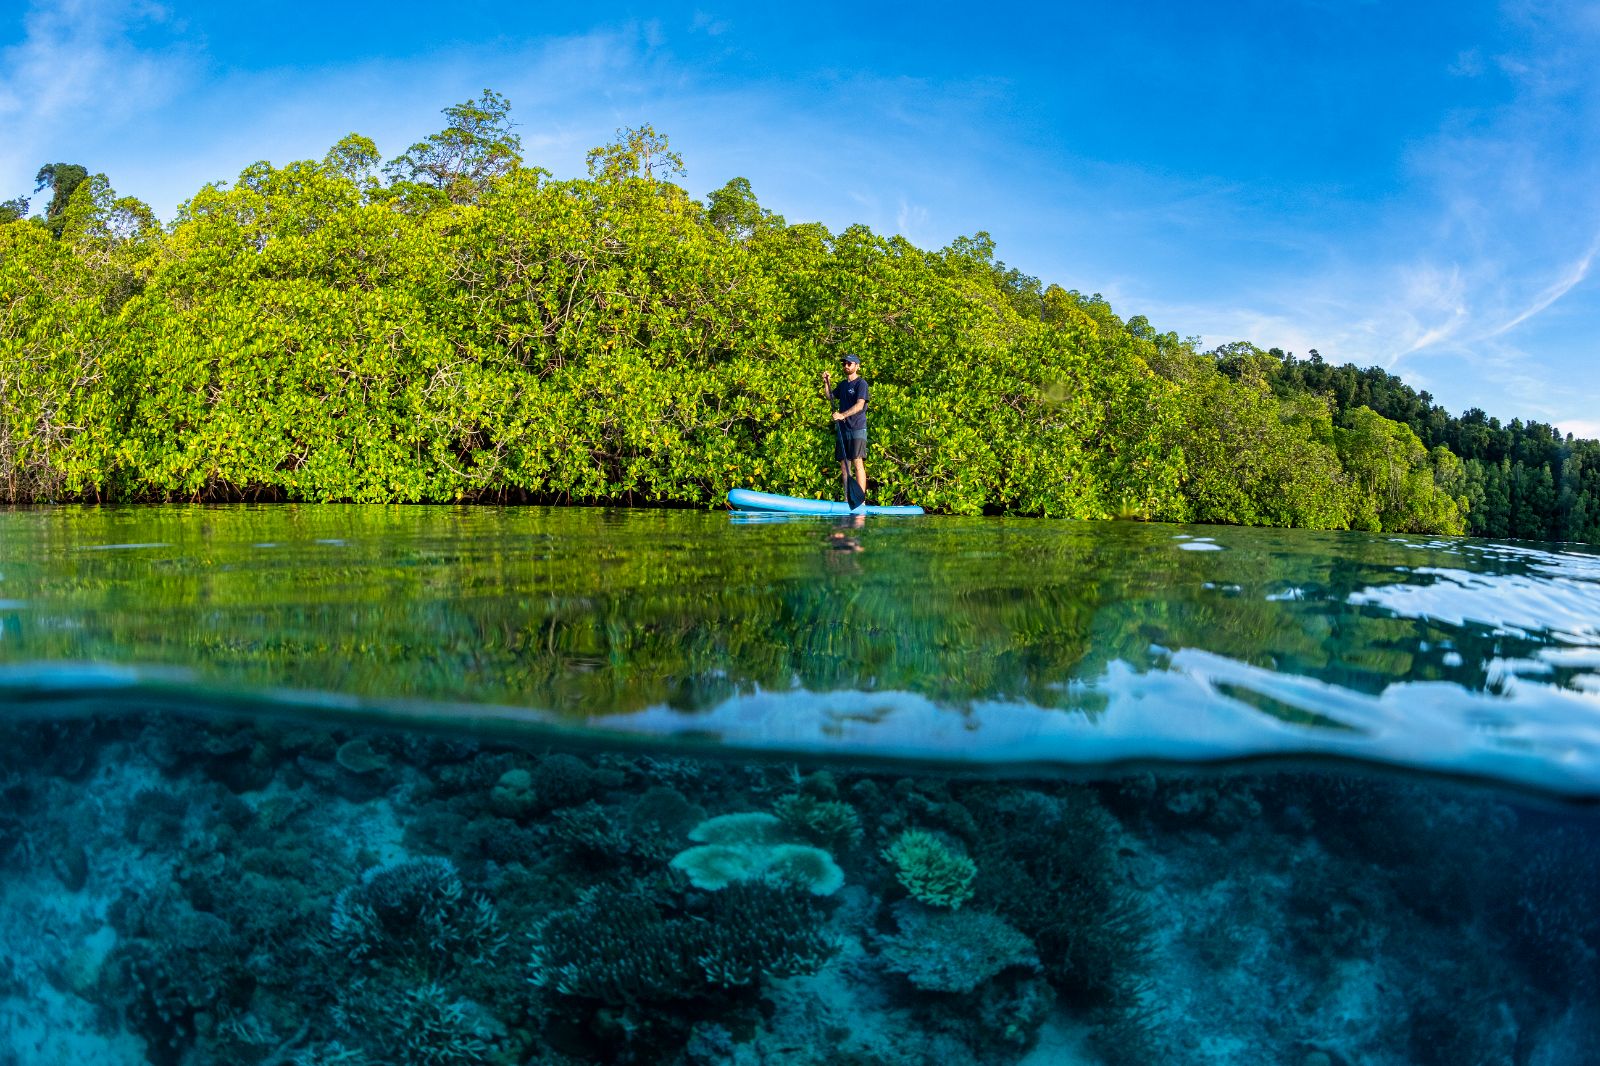 paddleboarding from the Majik phinisi in Indonesia